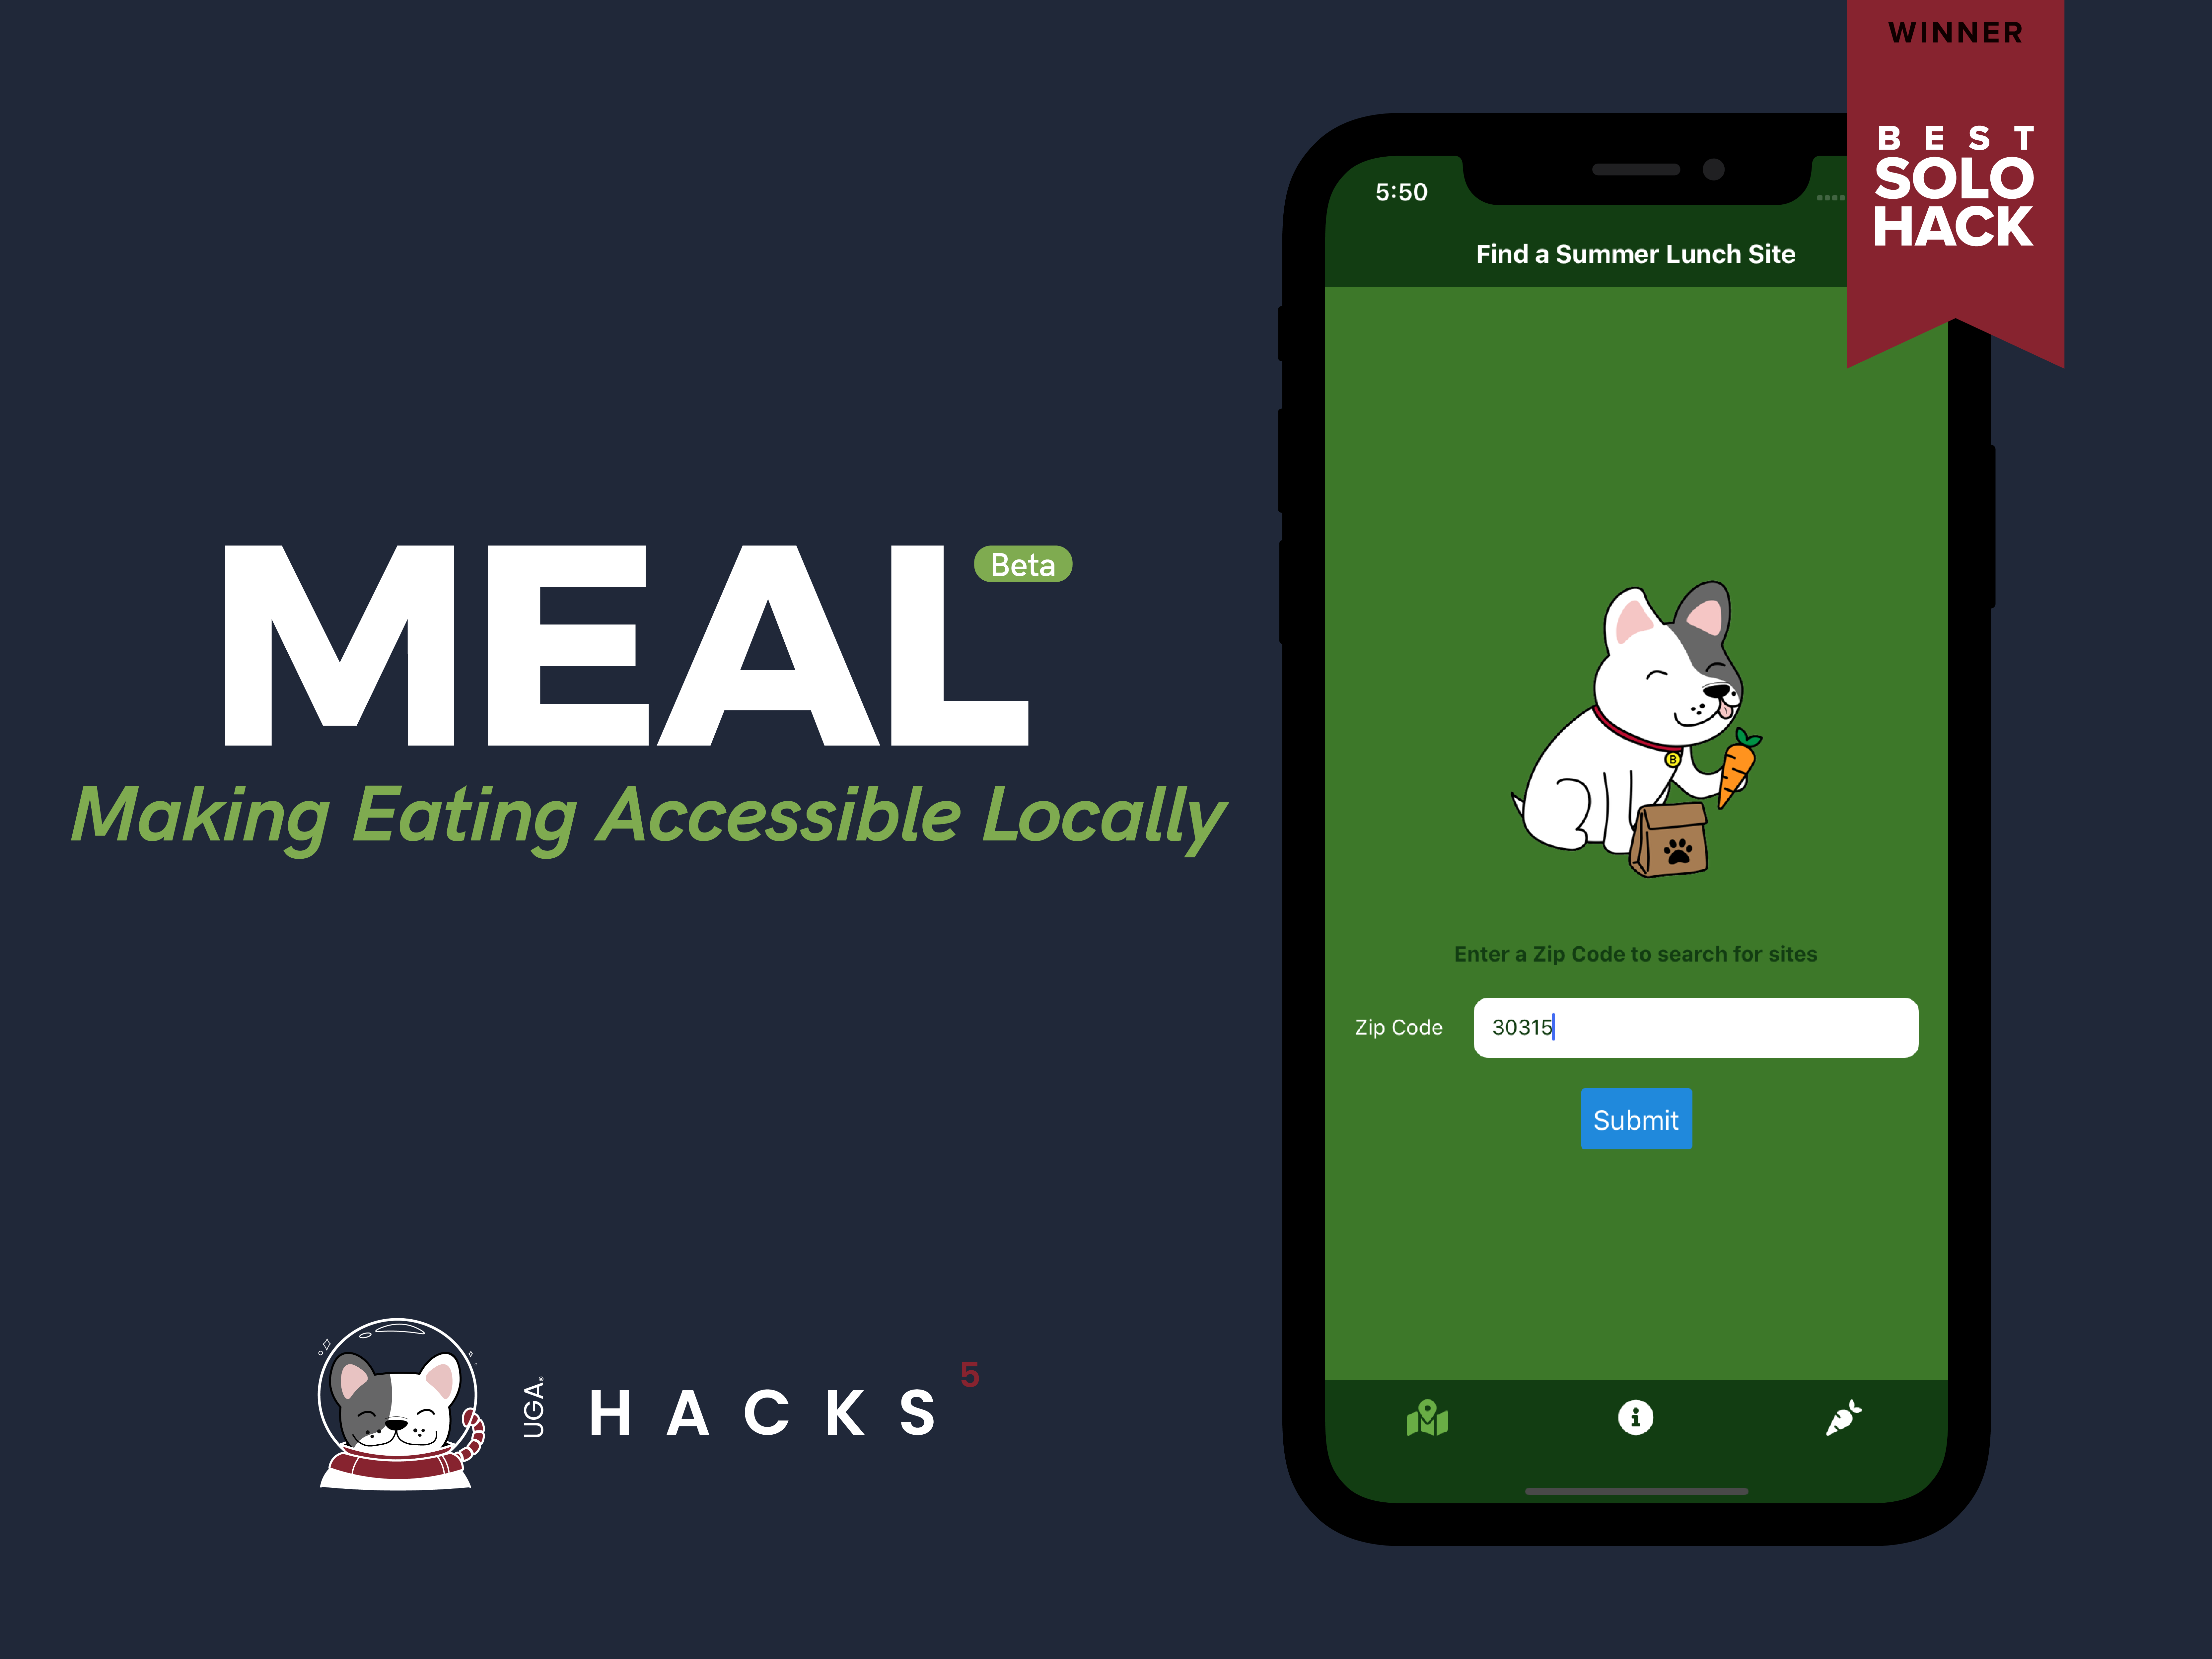 Preview of MEAL interface on iPhone 11 Pro